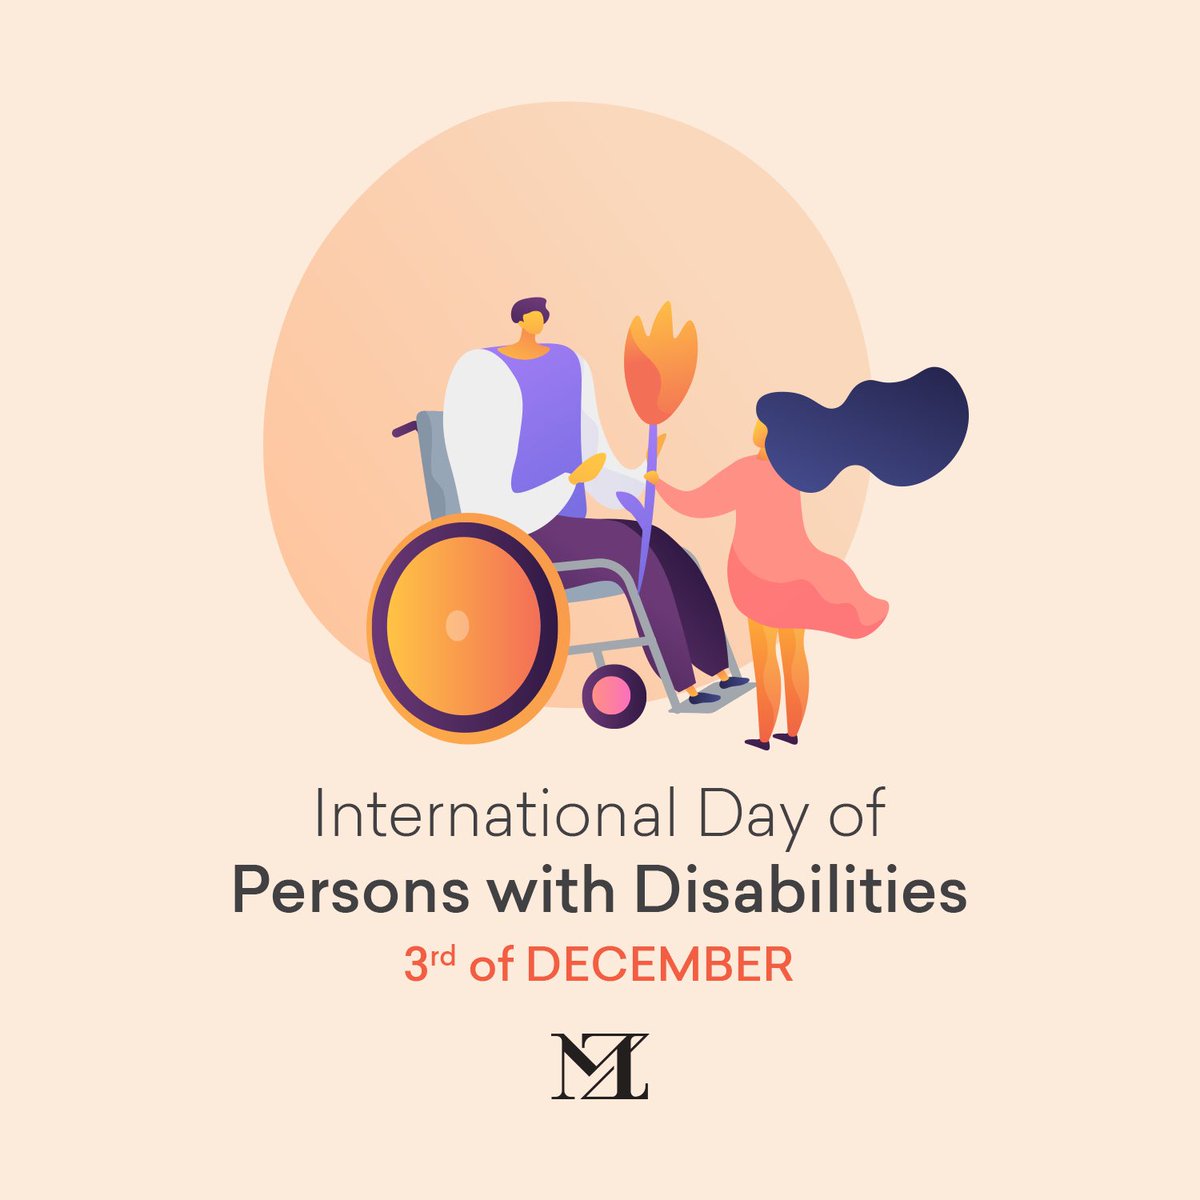 “There is no greater disability in society than the inability to see a person as more”
Robert M. Hensel

#IDPWD2019 #IDPD2019 #IDPD